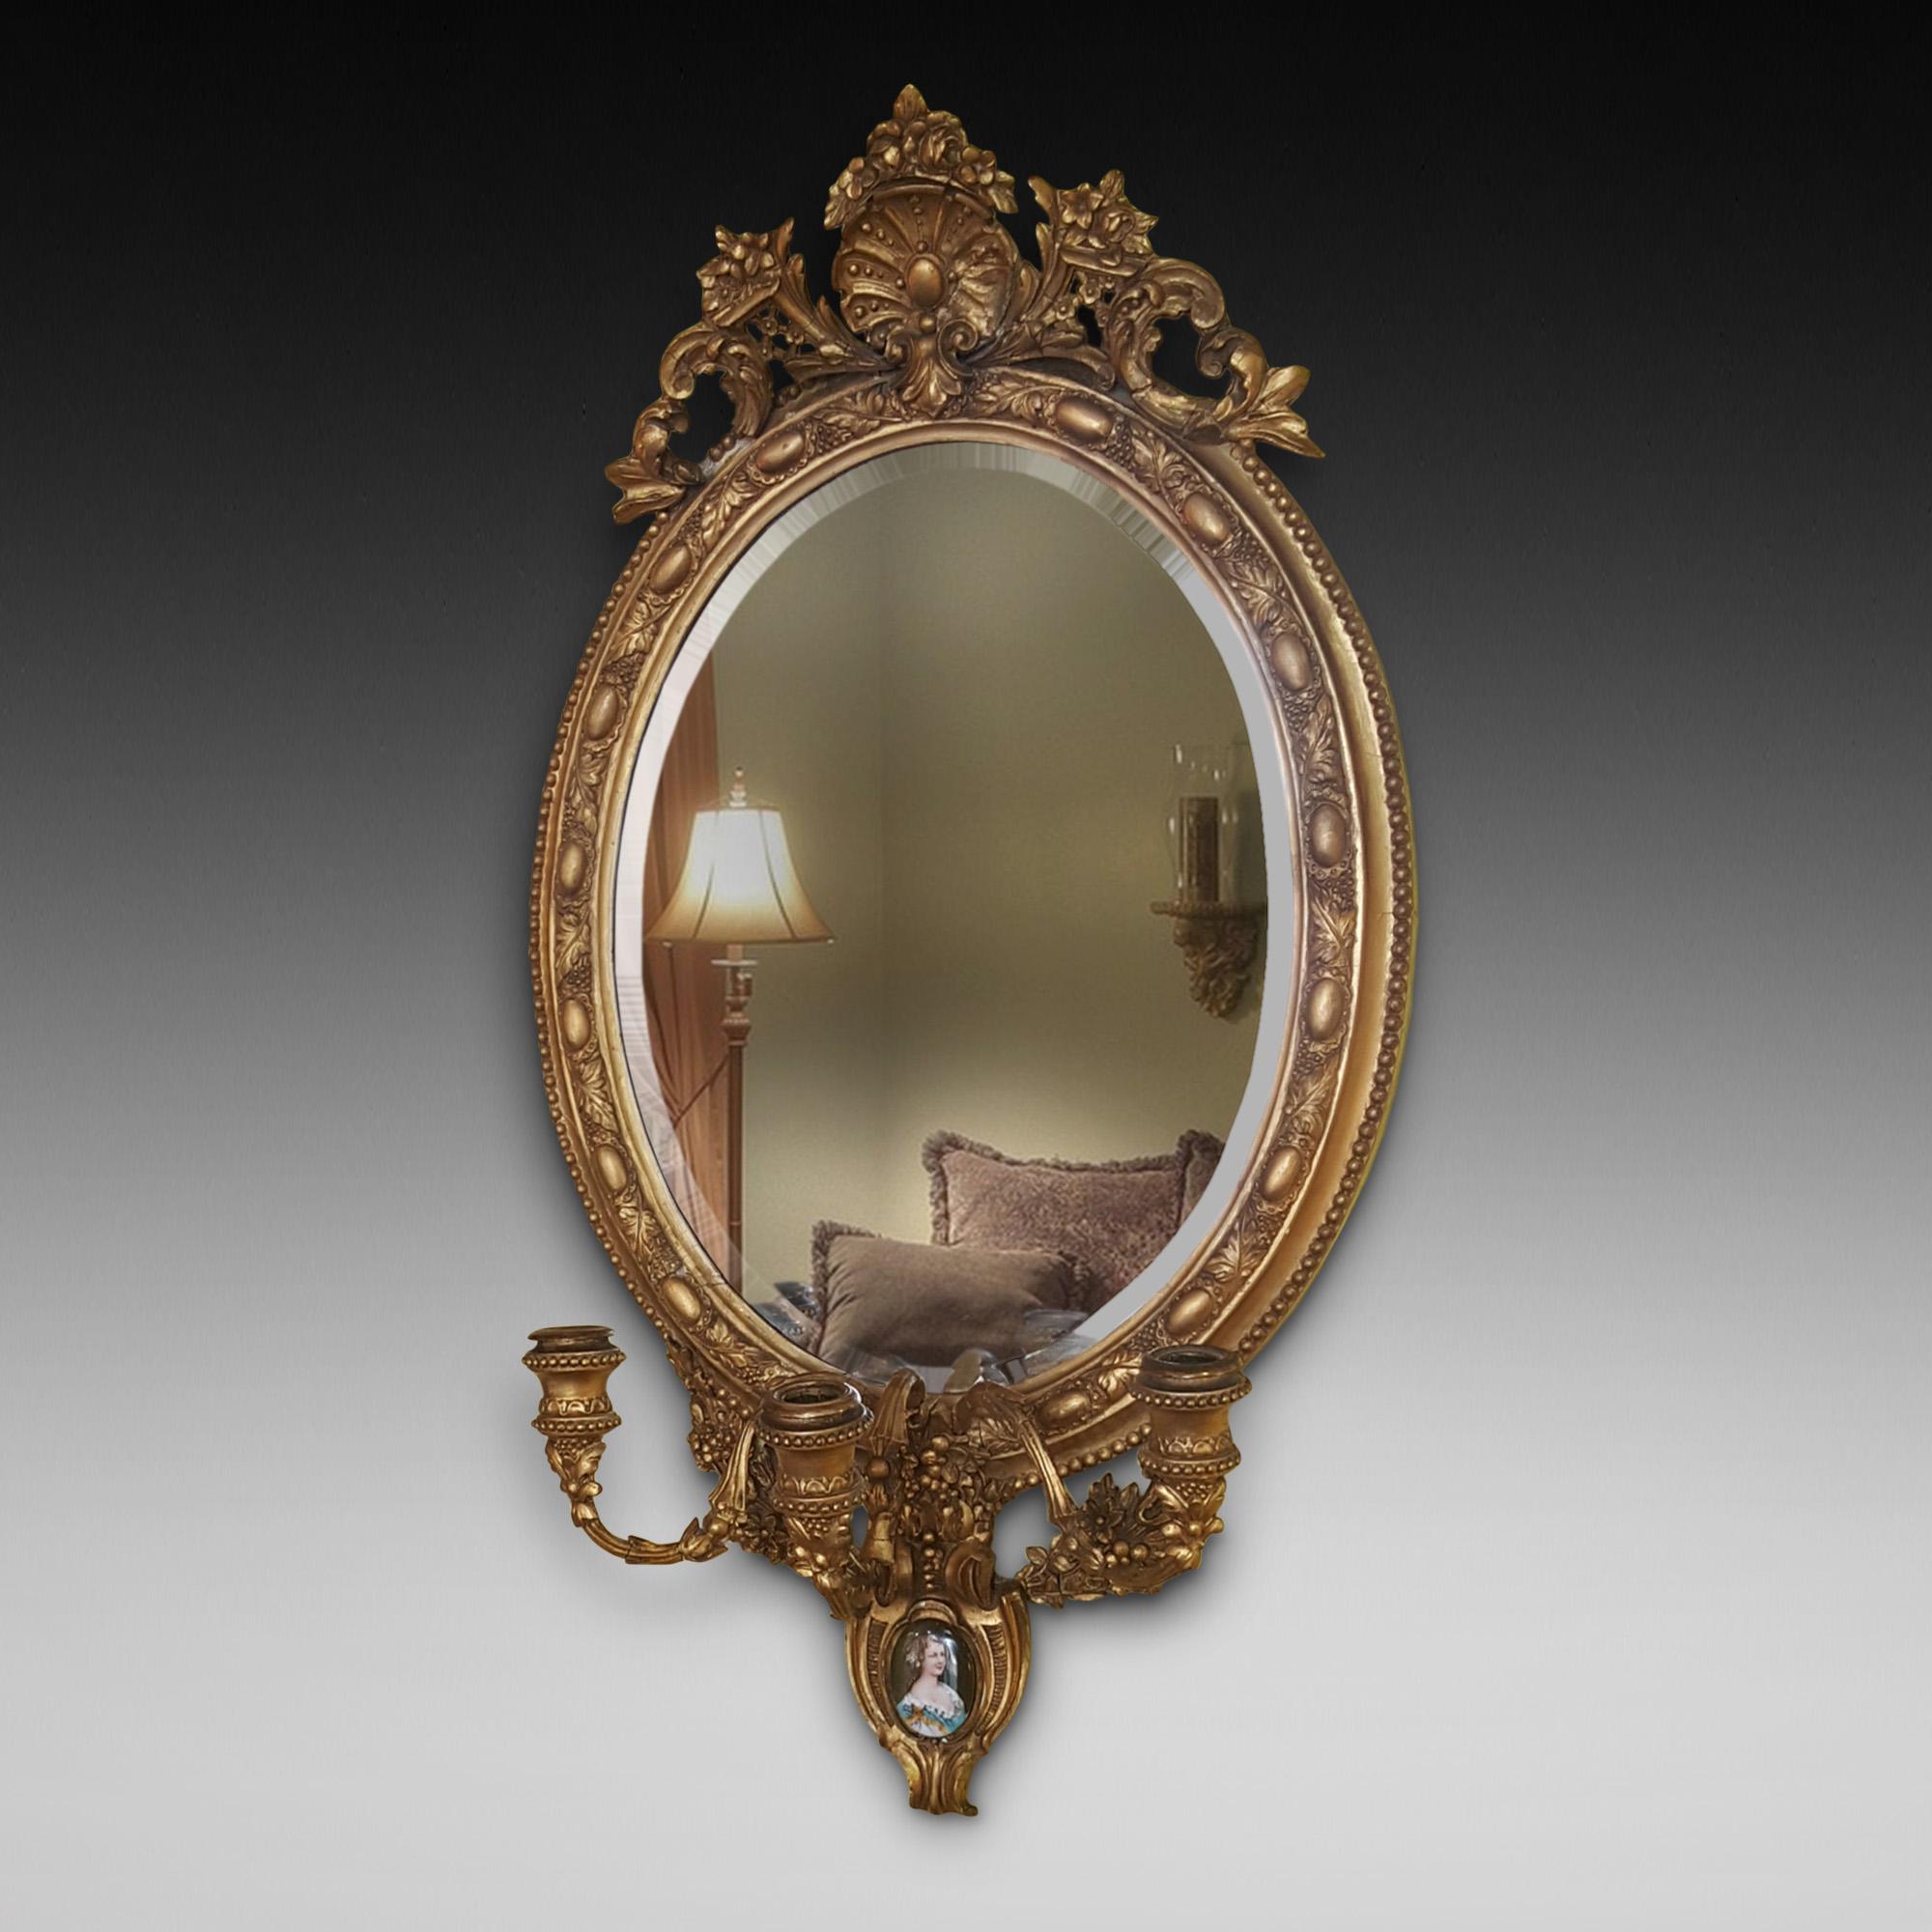 19th century gilt framed mirror with lower portrait plaque and three-candle branch holders, measures: 18